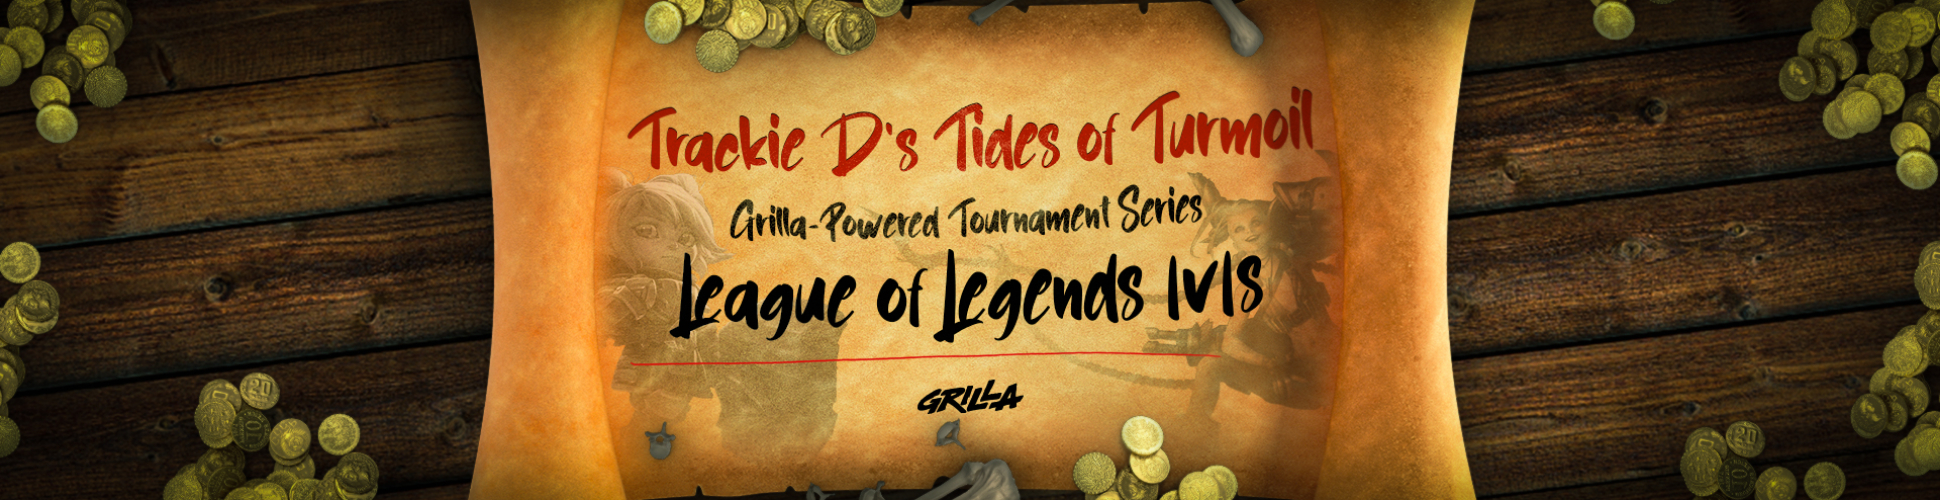 Trackie D's Tides of Turmoil - A Grilla-Powered Tournament Series